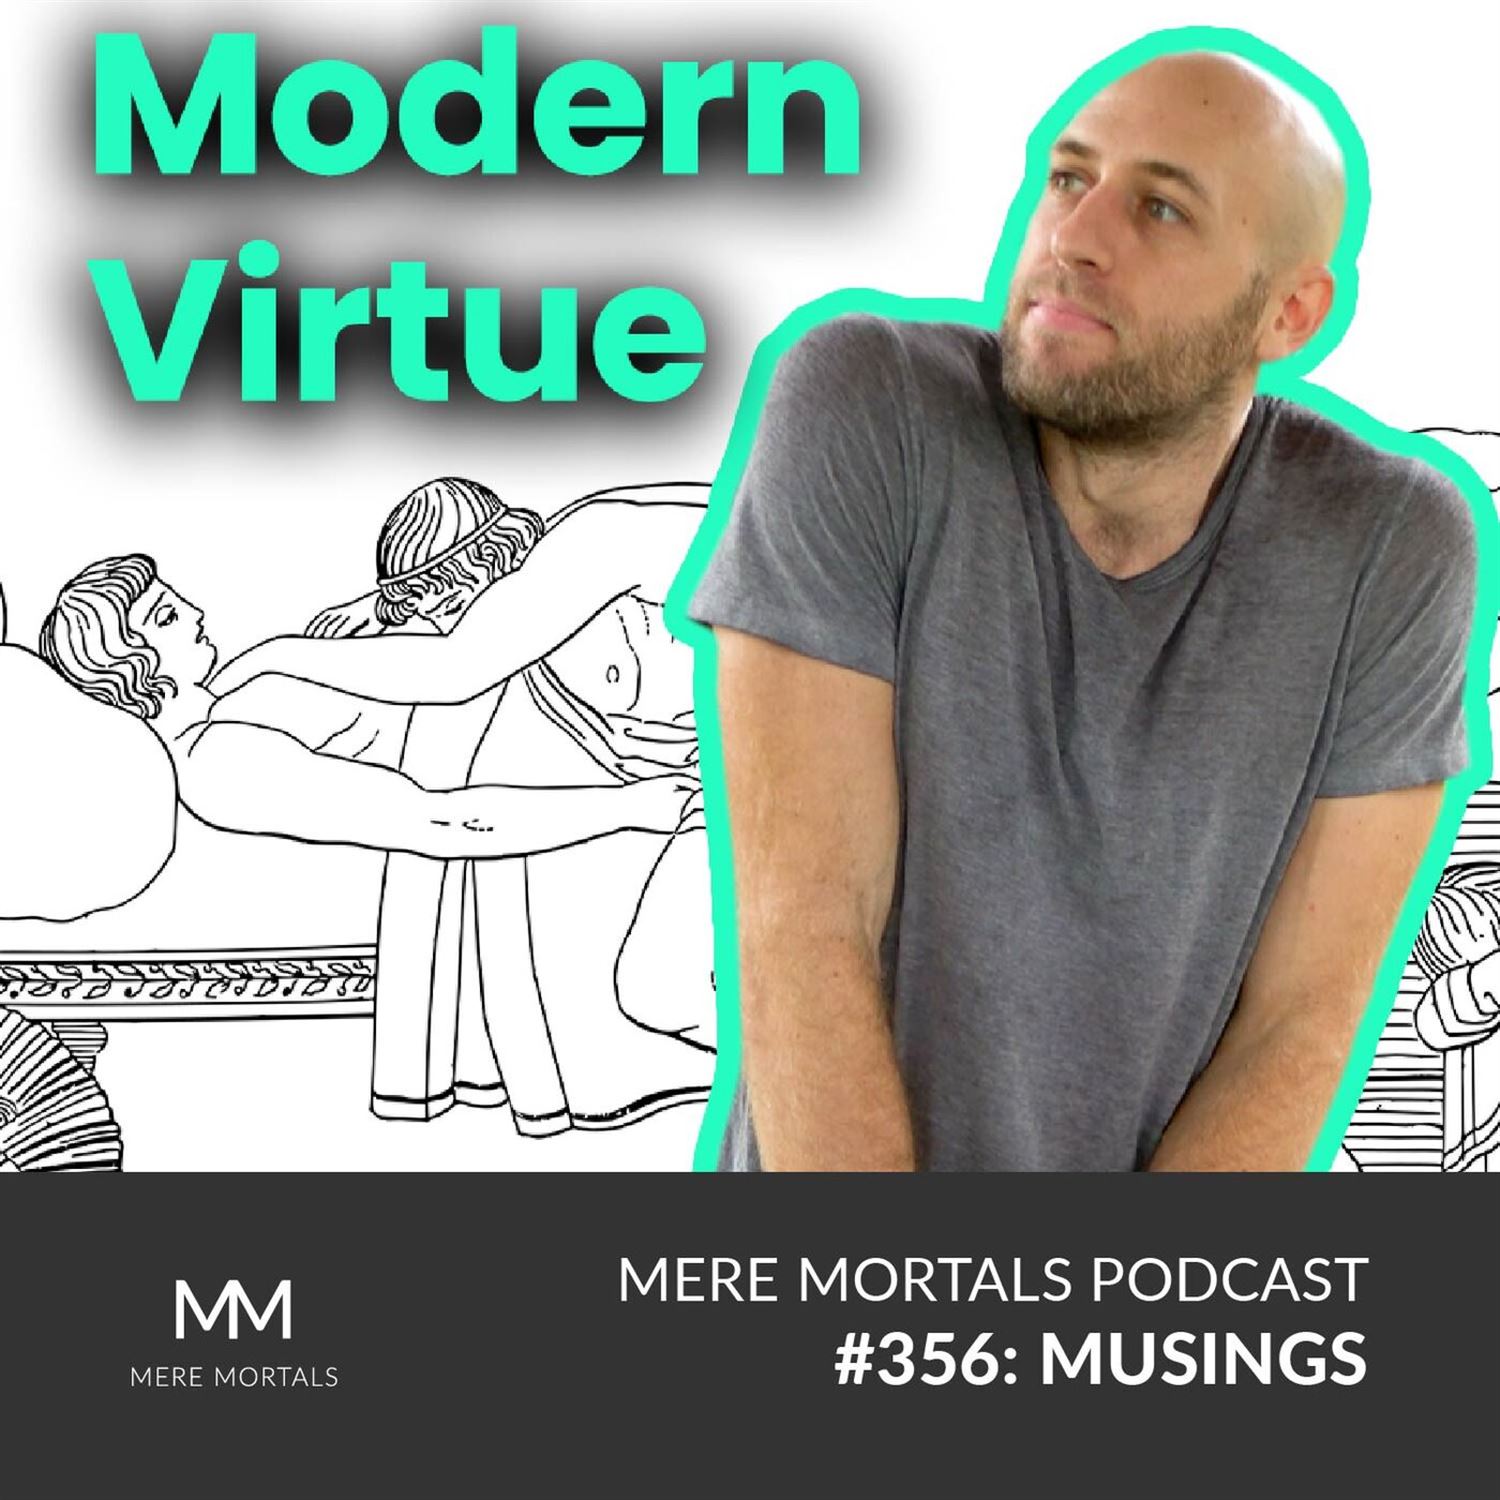 Cultivating Virtue In The Modern Age | Is It Useful Or Archaic?